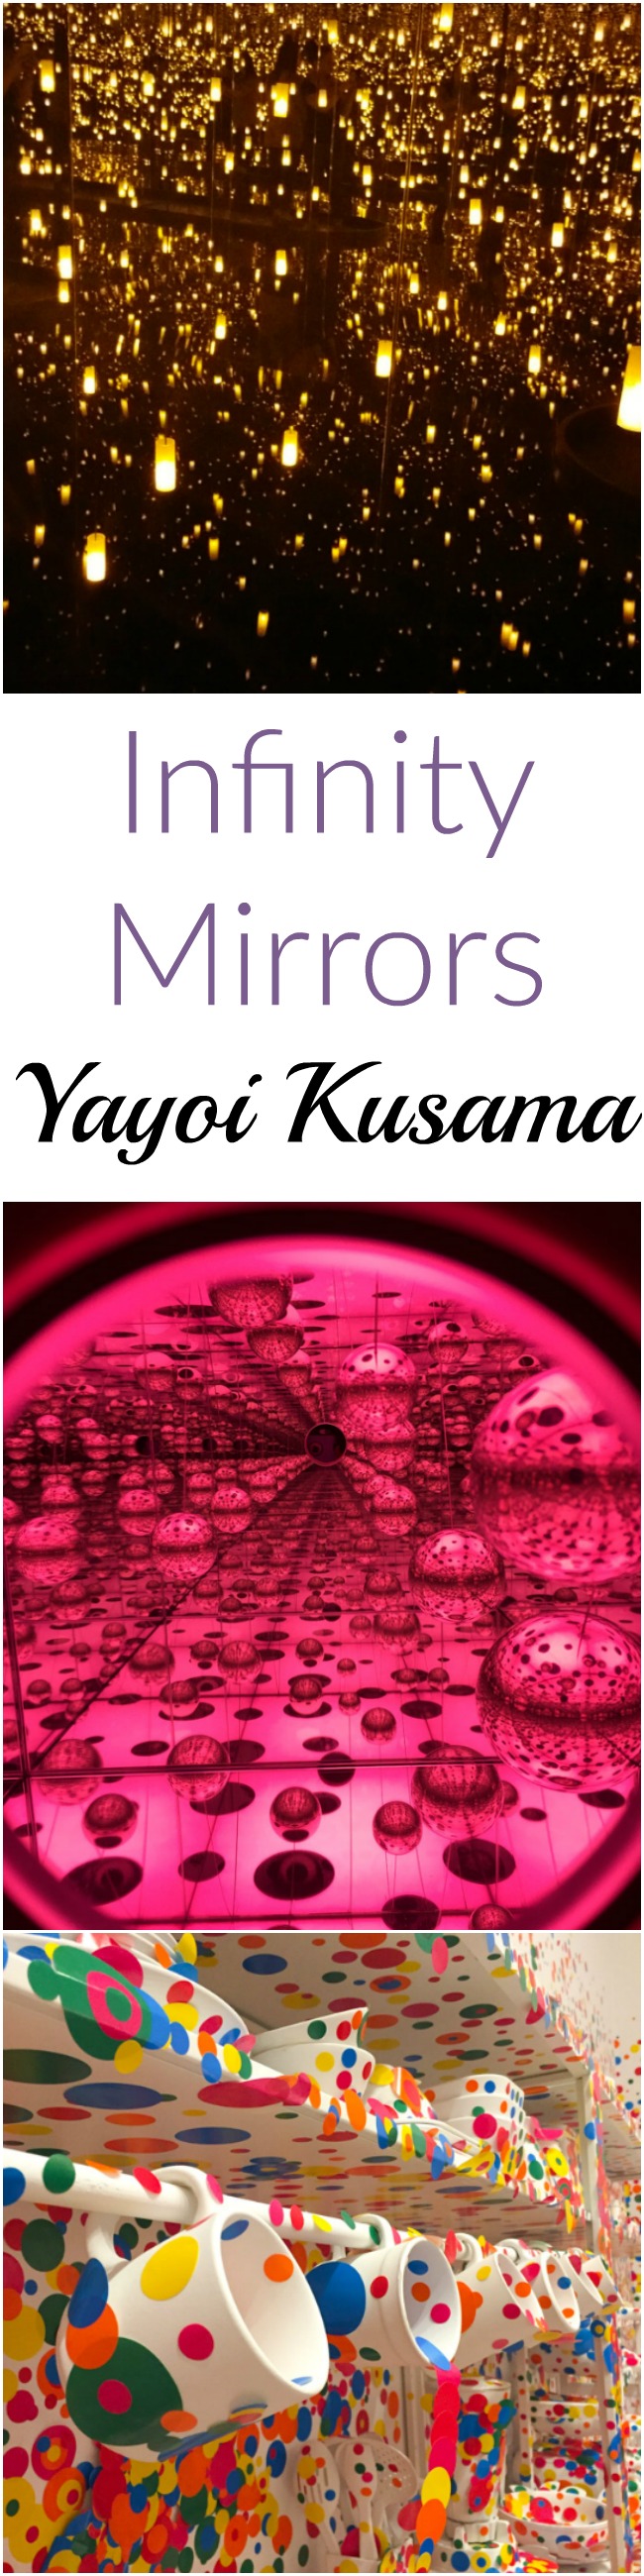 Infinity Mirrors by Yayoi Kusama is an immersive art experience worth the visit! 